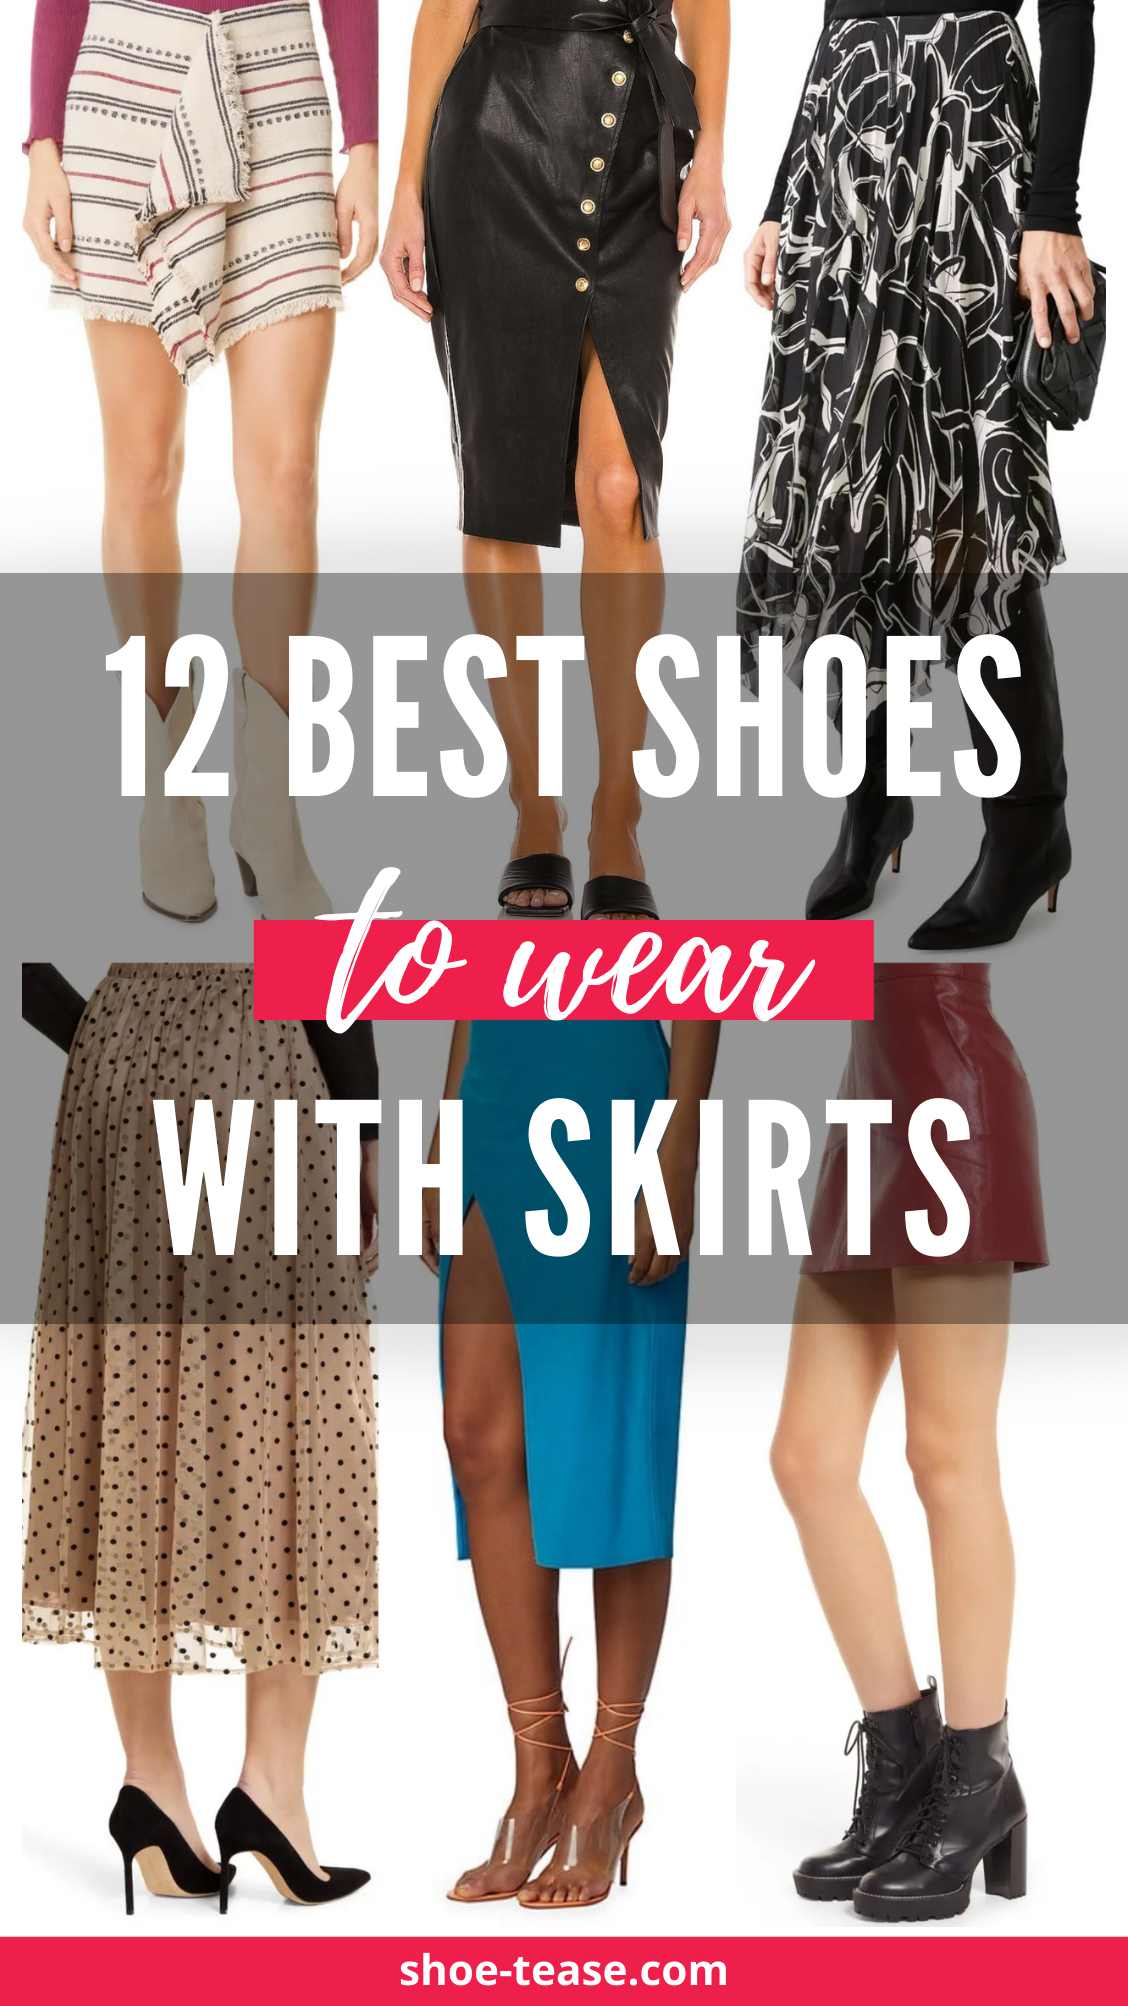 Best Shoes to Wear with Skirts 1